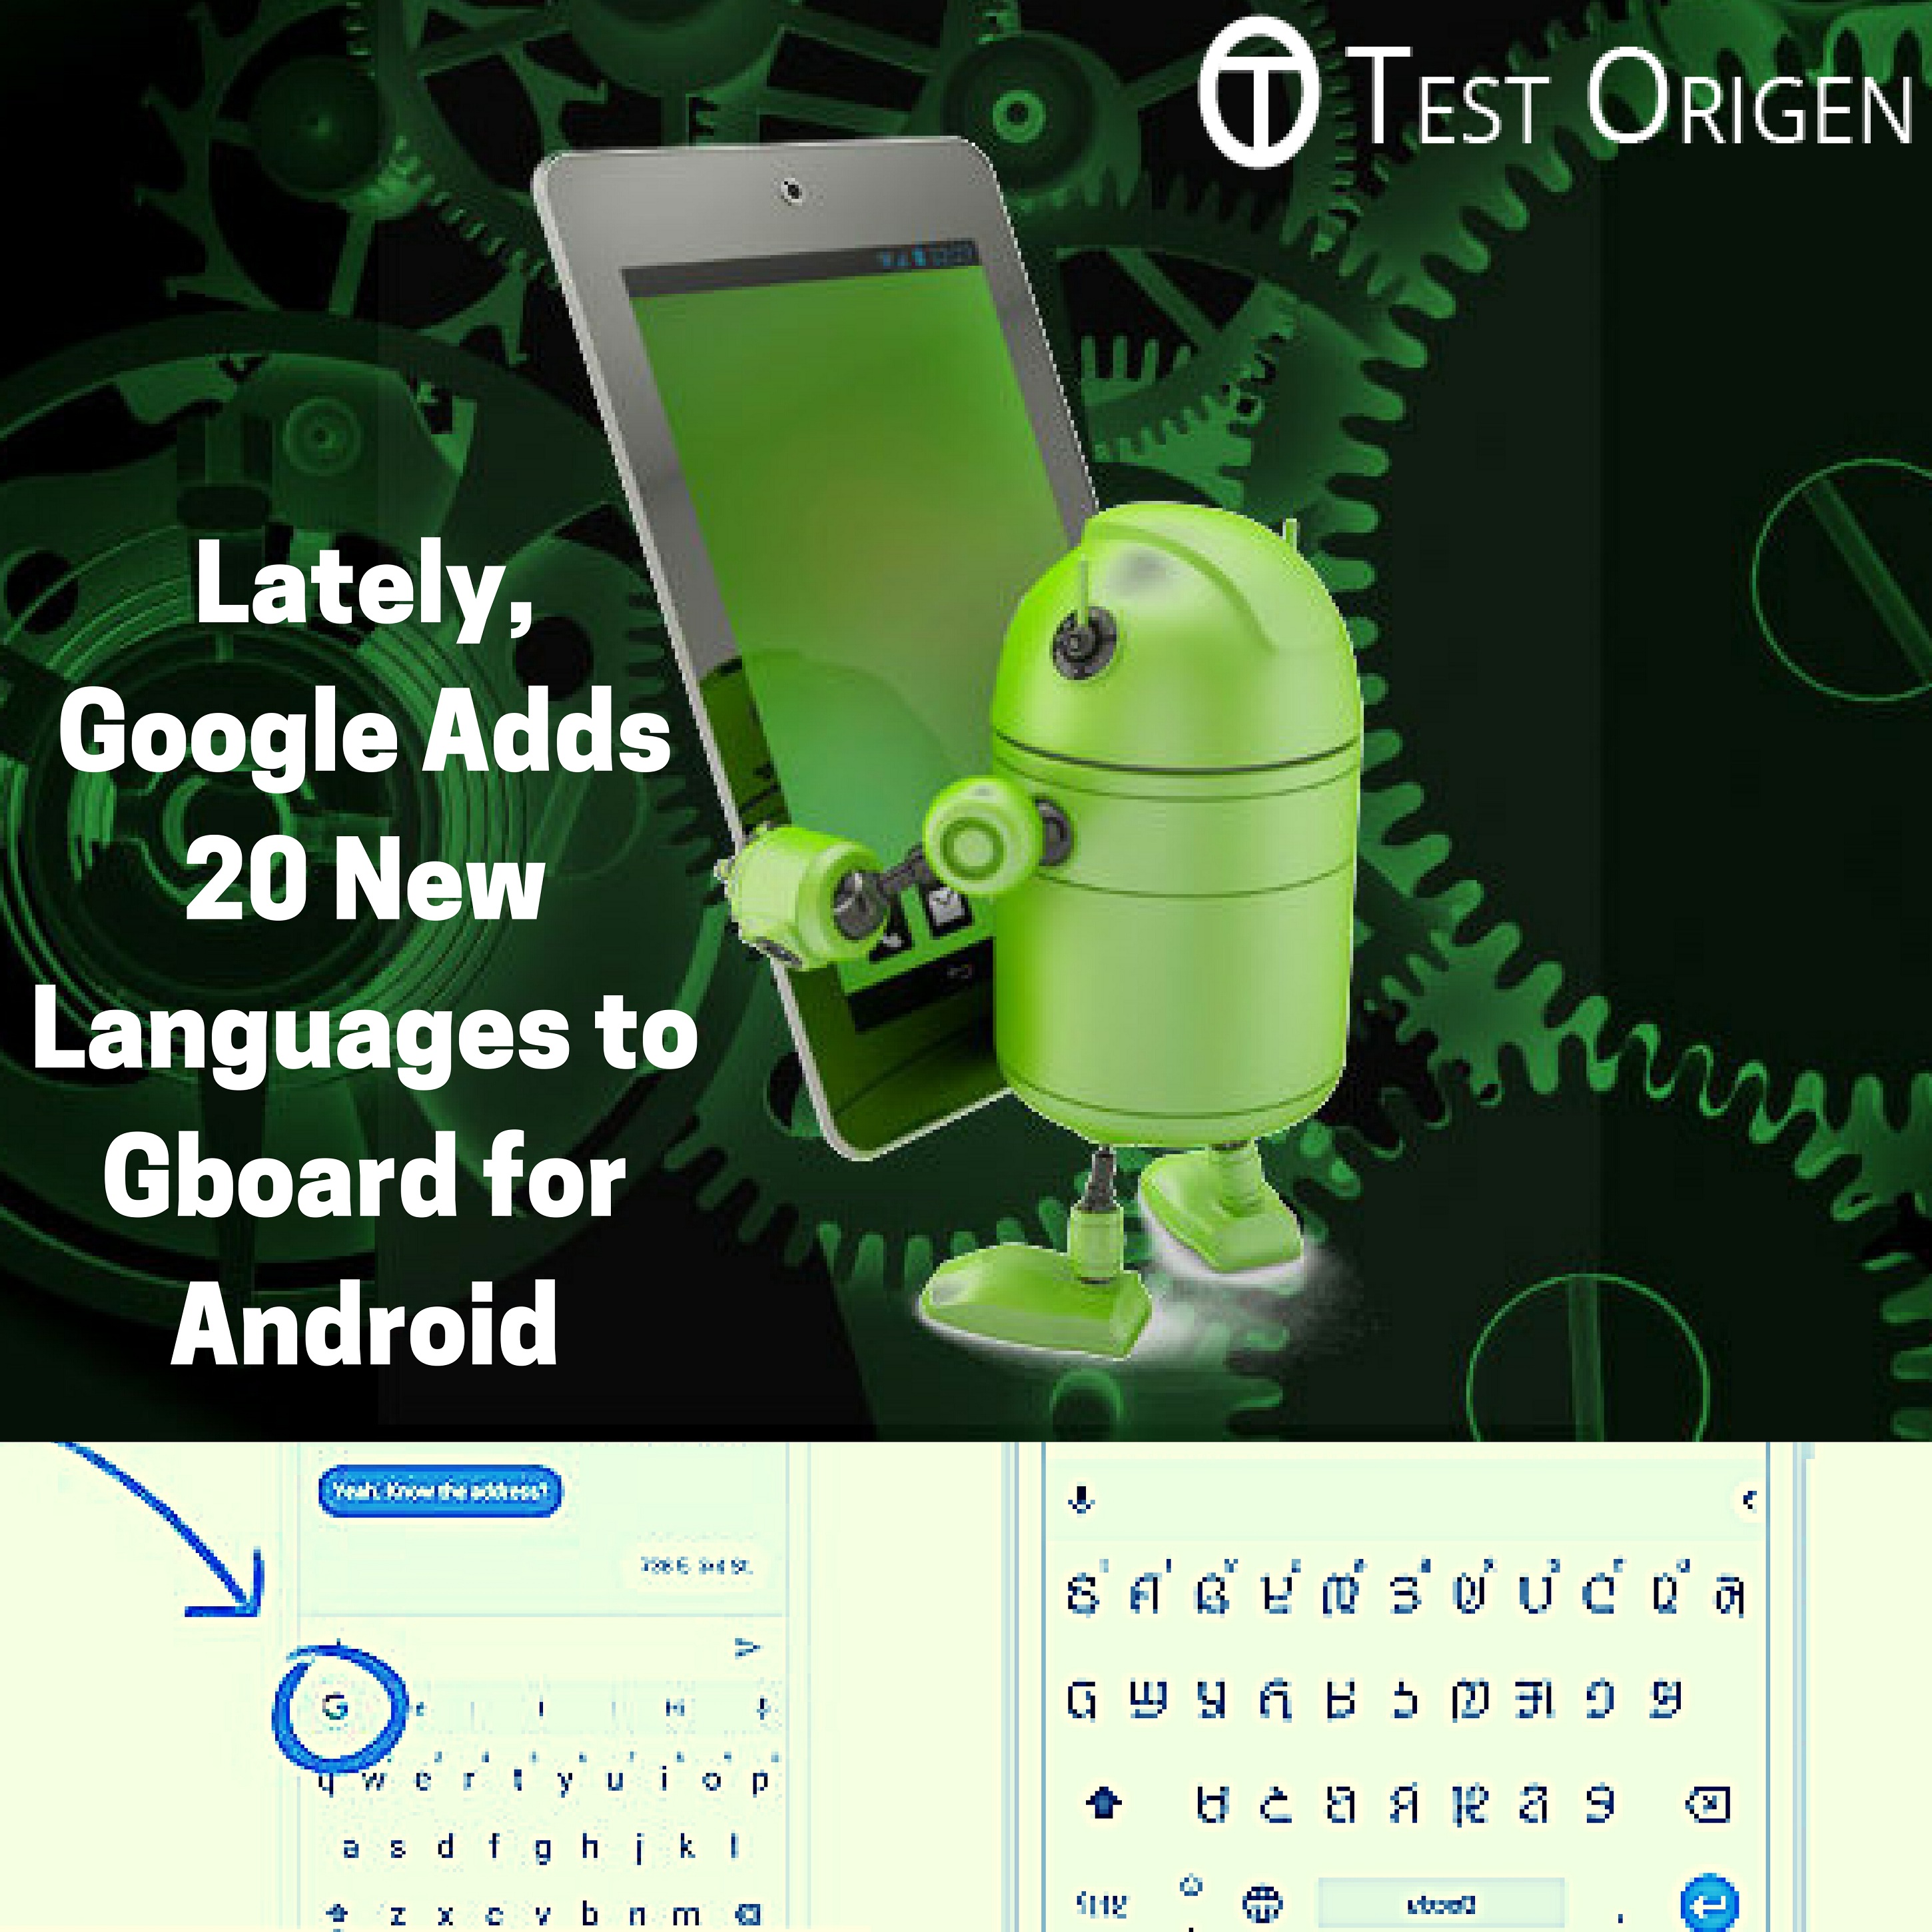 Lately, Google Adds 20 New Languages to Gboard for Android